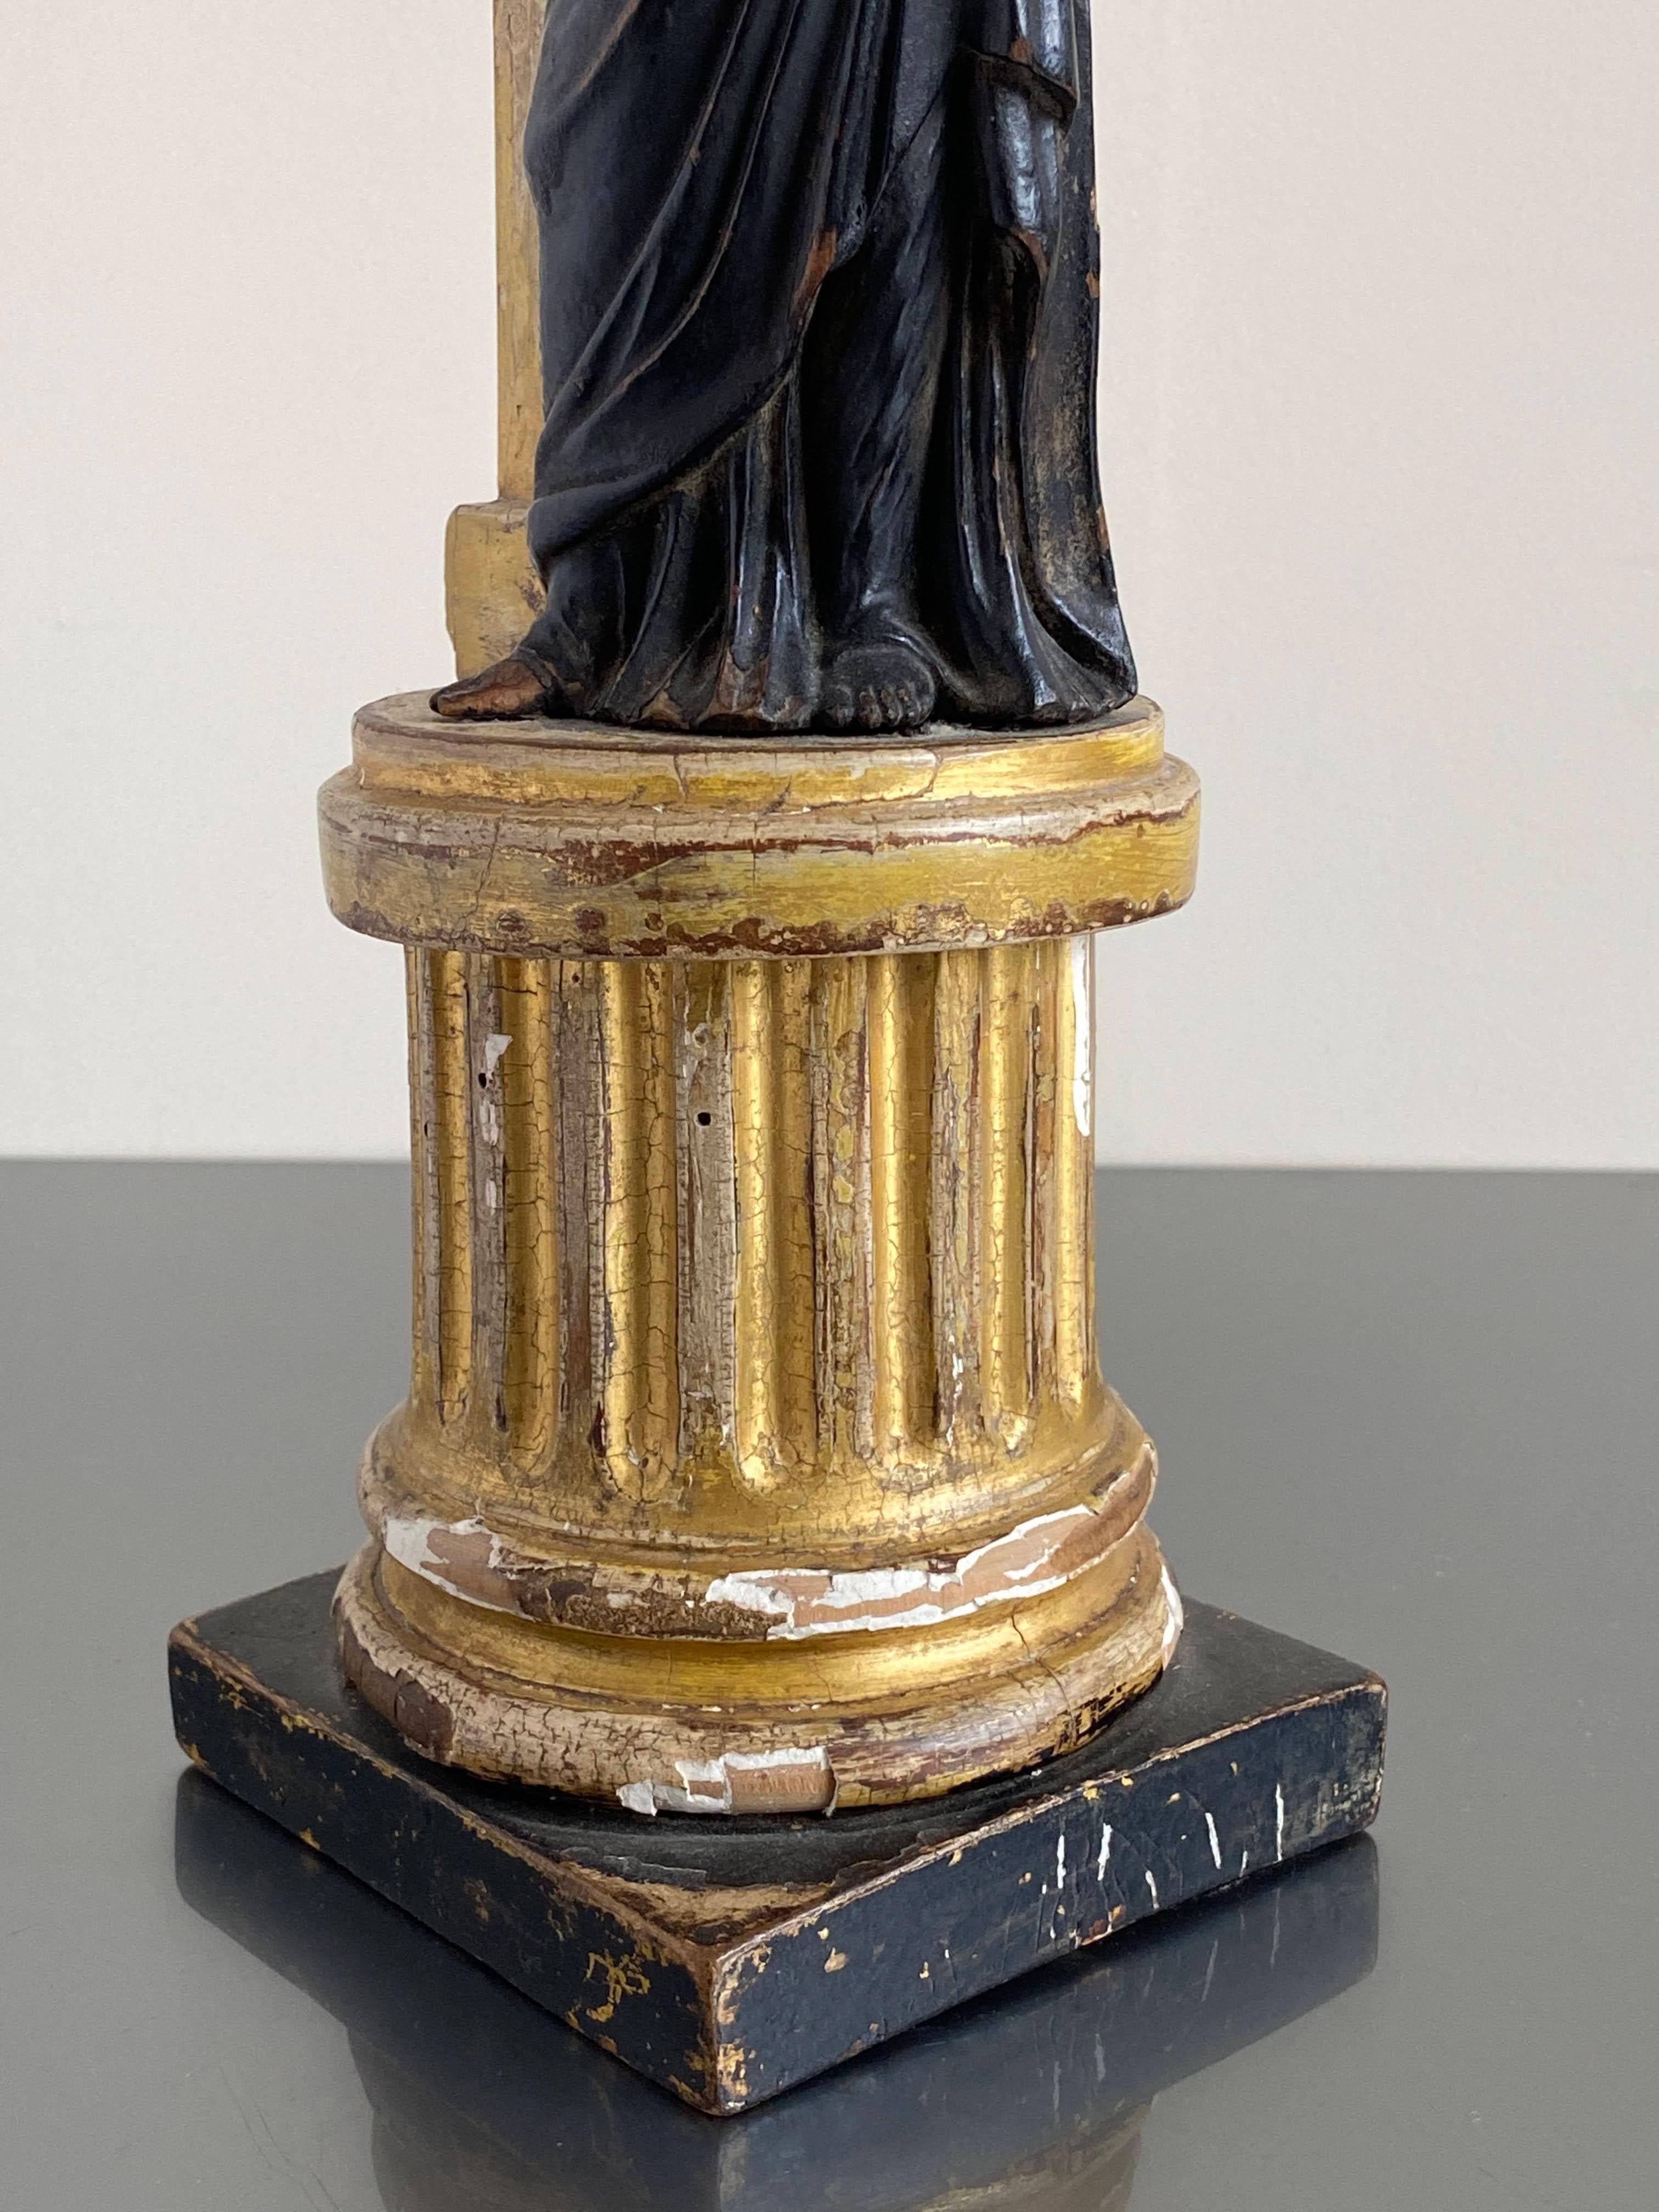 Wood Late 18c Carved Statue of the Roman Goddess 'Fortuna' Standing on a Fluted Gilt